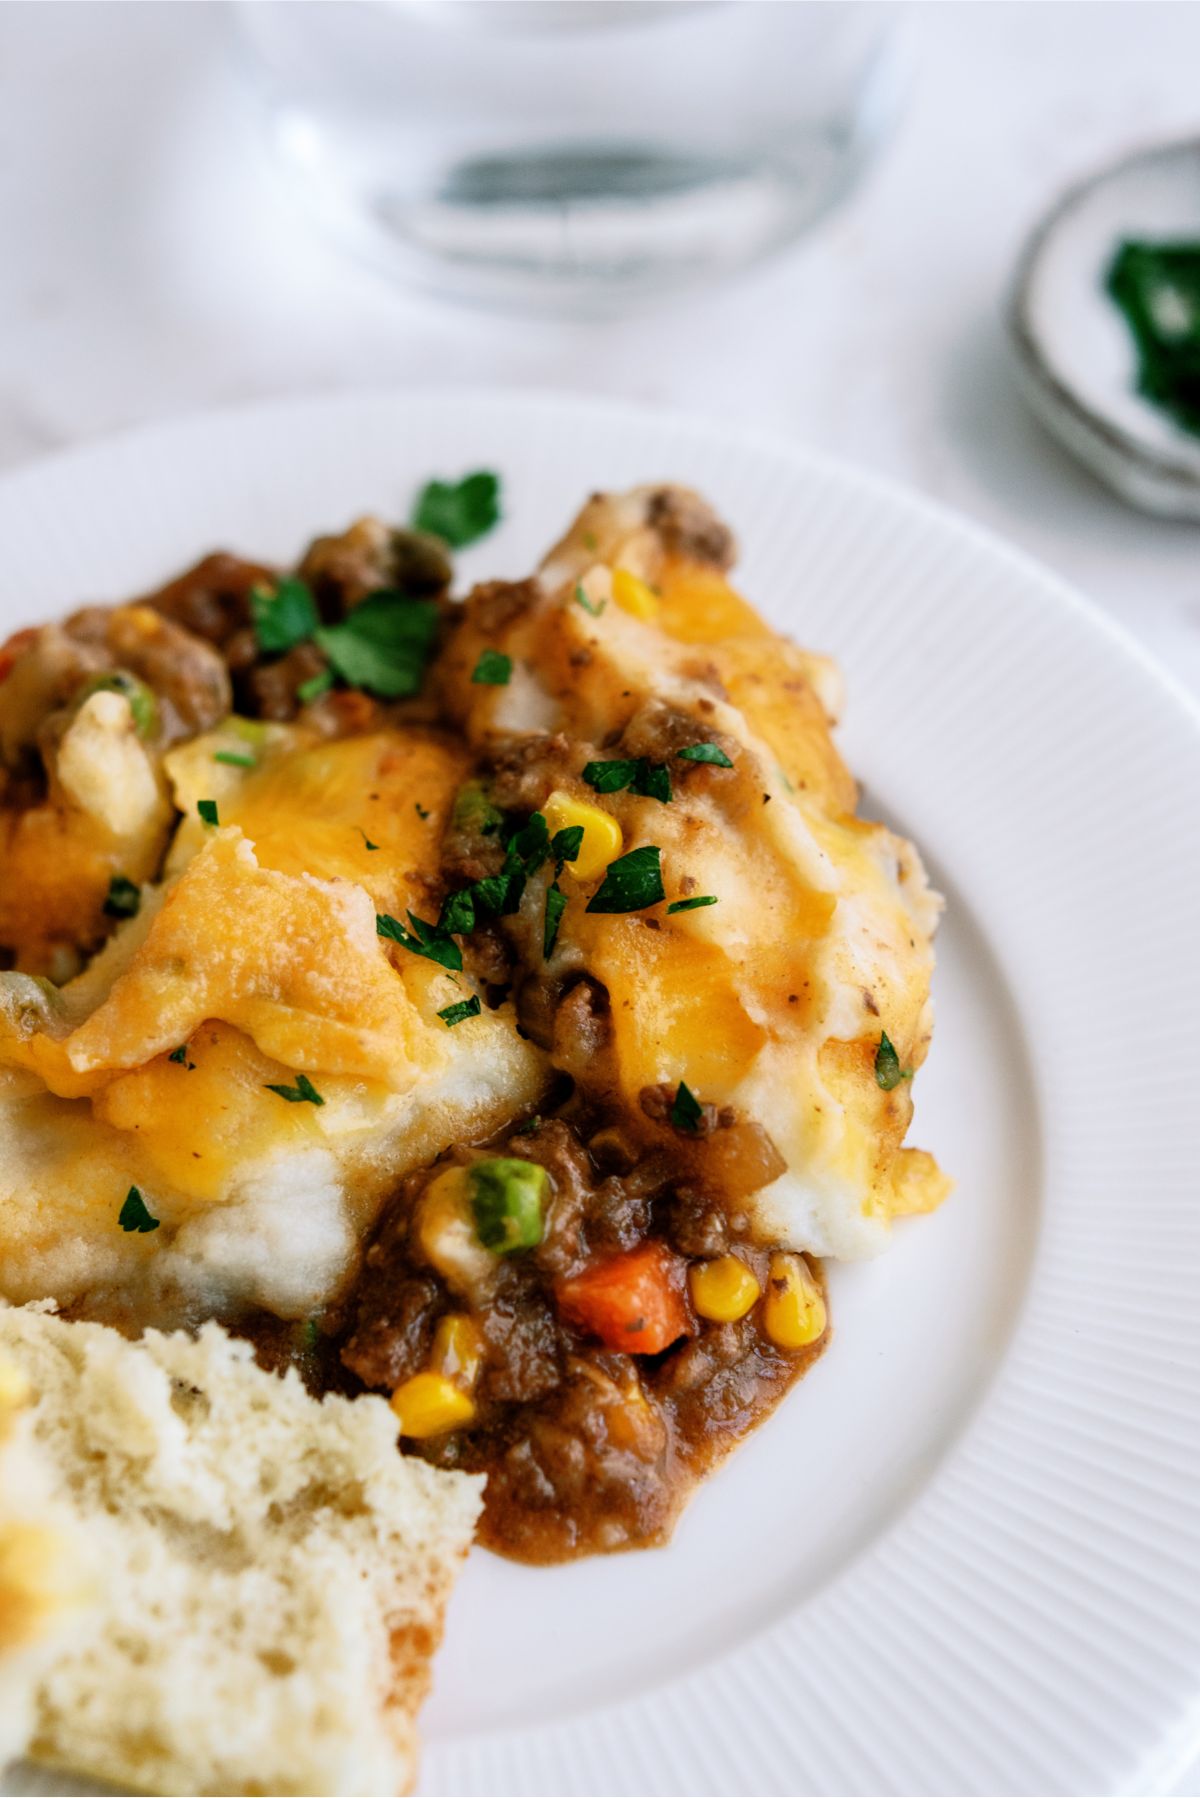 A serving of Slow Cooker Ground Beef Shepherd’s Pie Recipe on a plate